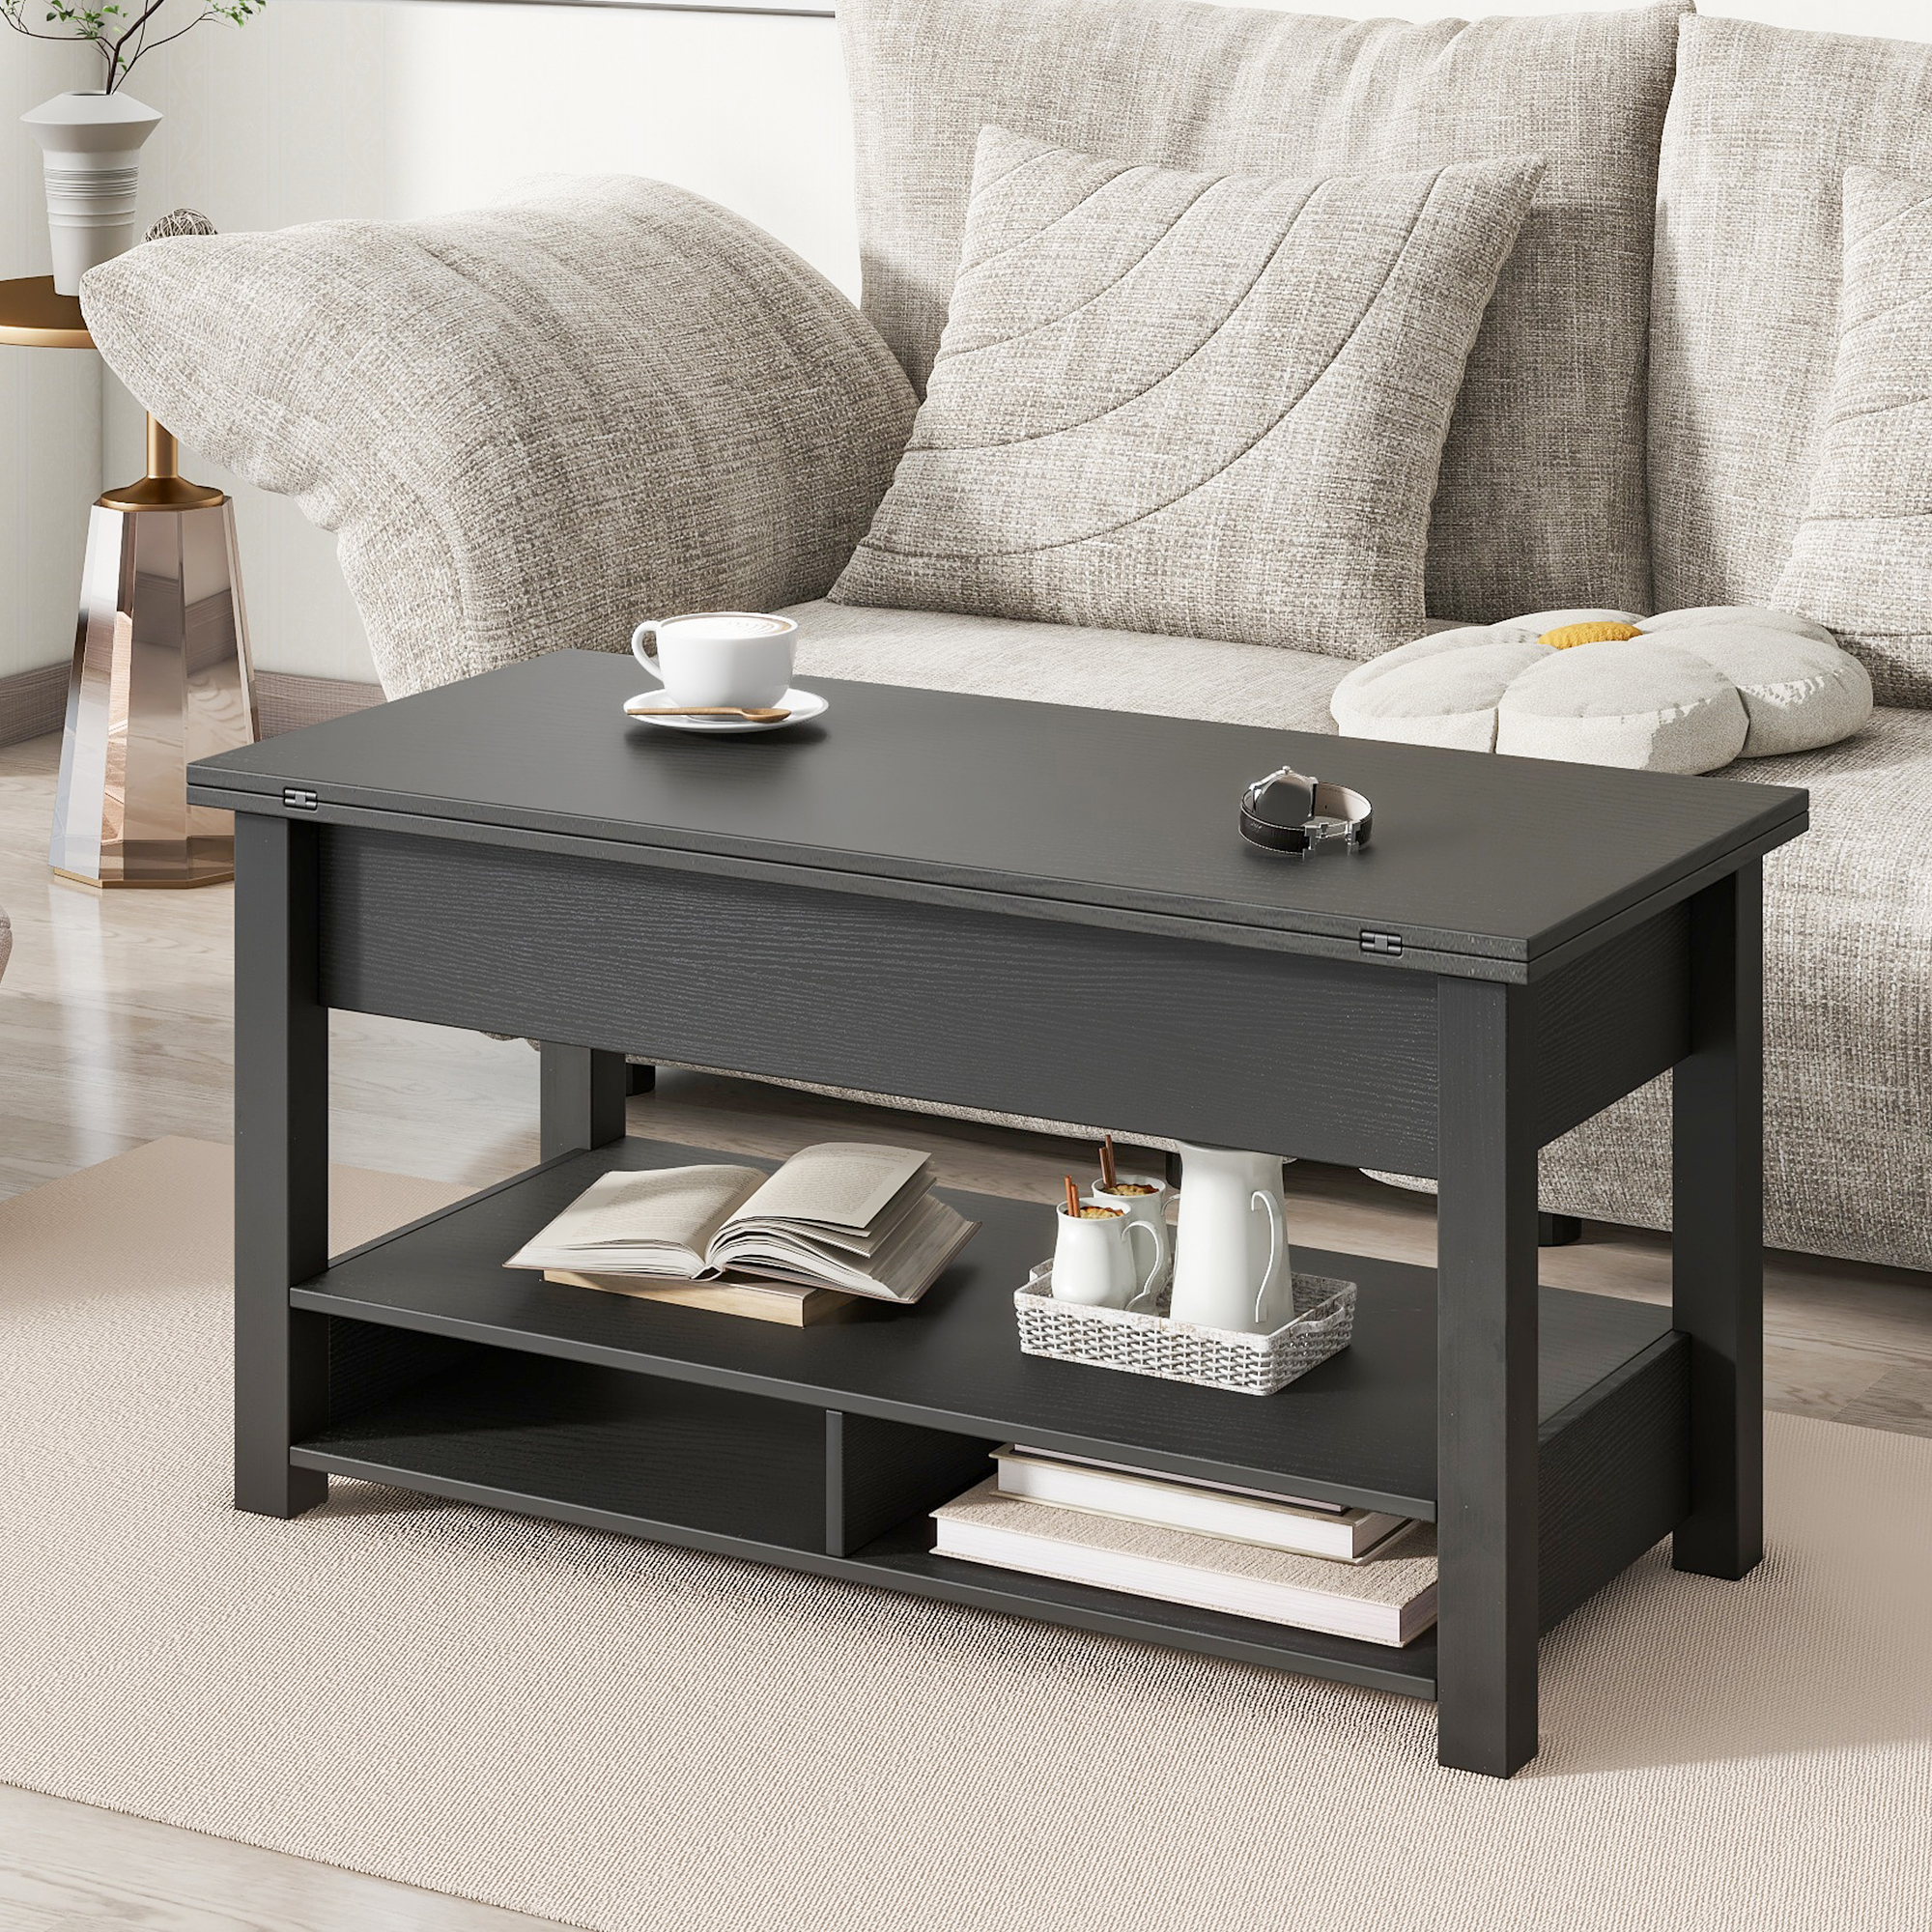 Multi-Functional Coffee Table with Open Shelves - WF314404AAB